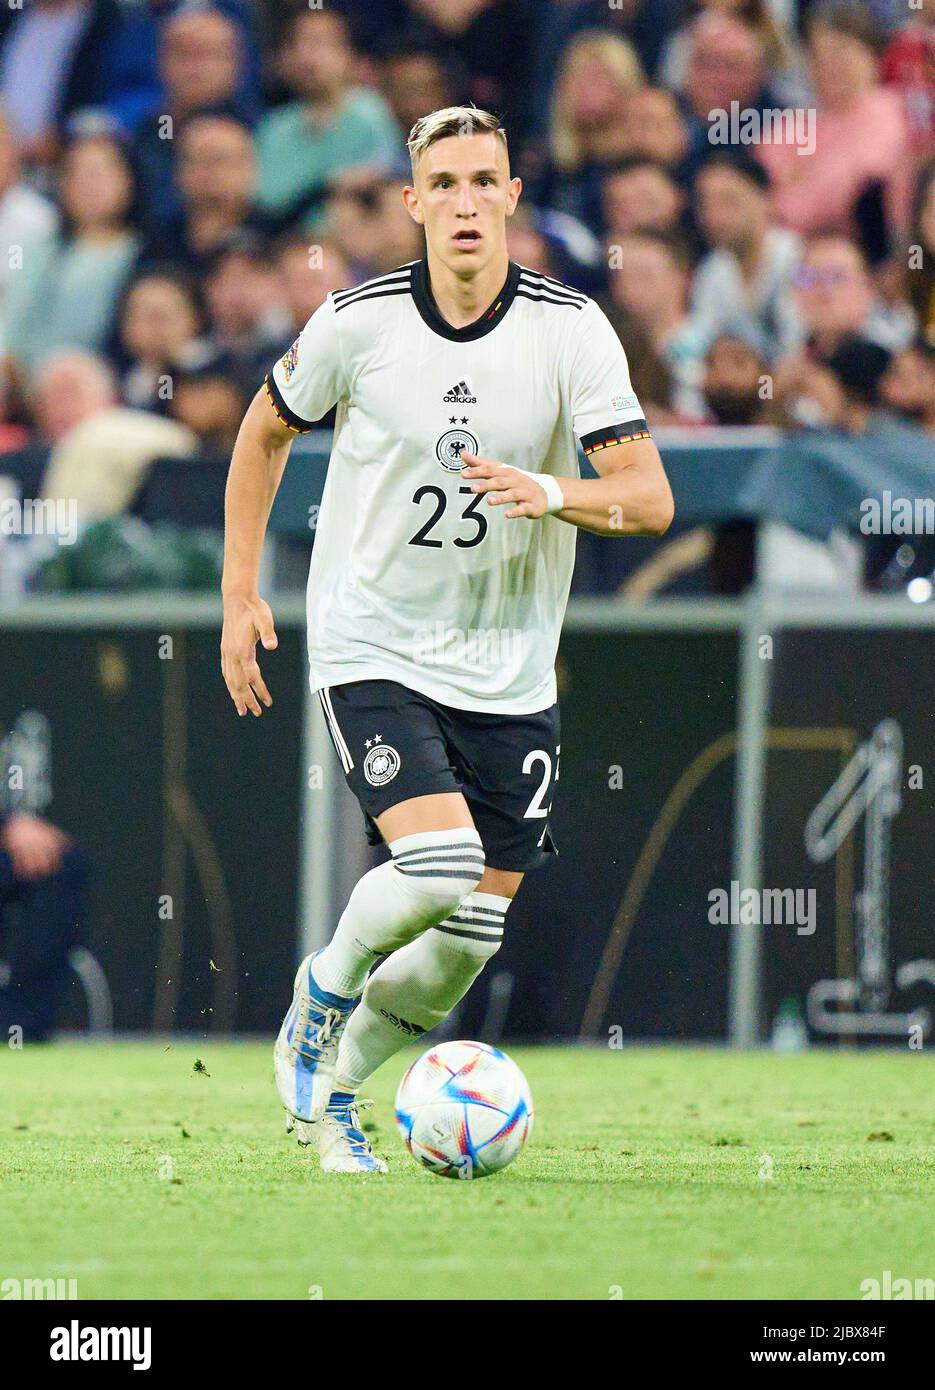 Nico Schlotterbeck, DFB 23  in the UEFA Nations League 2022 match GERMANY - ENGLAND 1-1  in Season 2022/2023 on Juni 07, 2022  in Munich, Germany.  © Peter Schatz / Alamy Live News Stock Photo